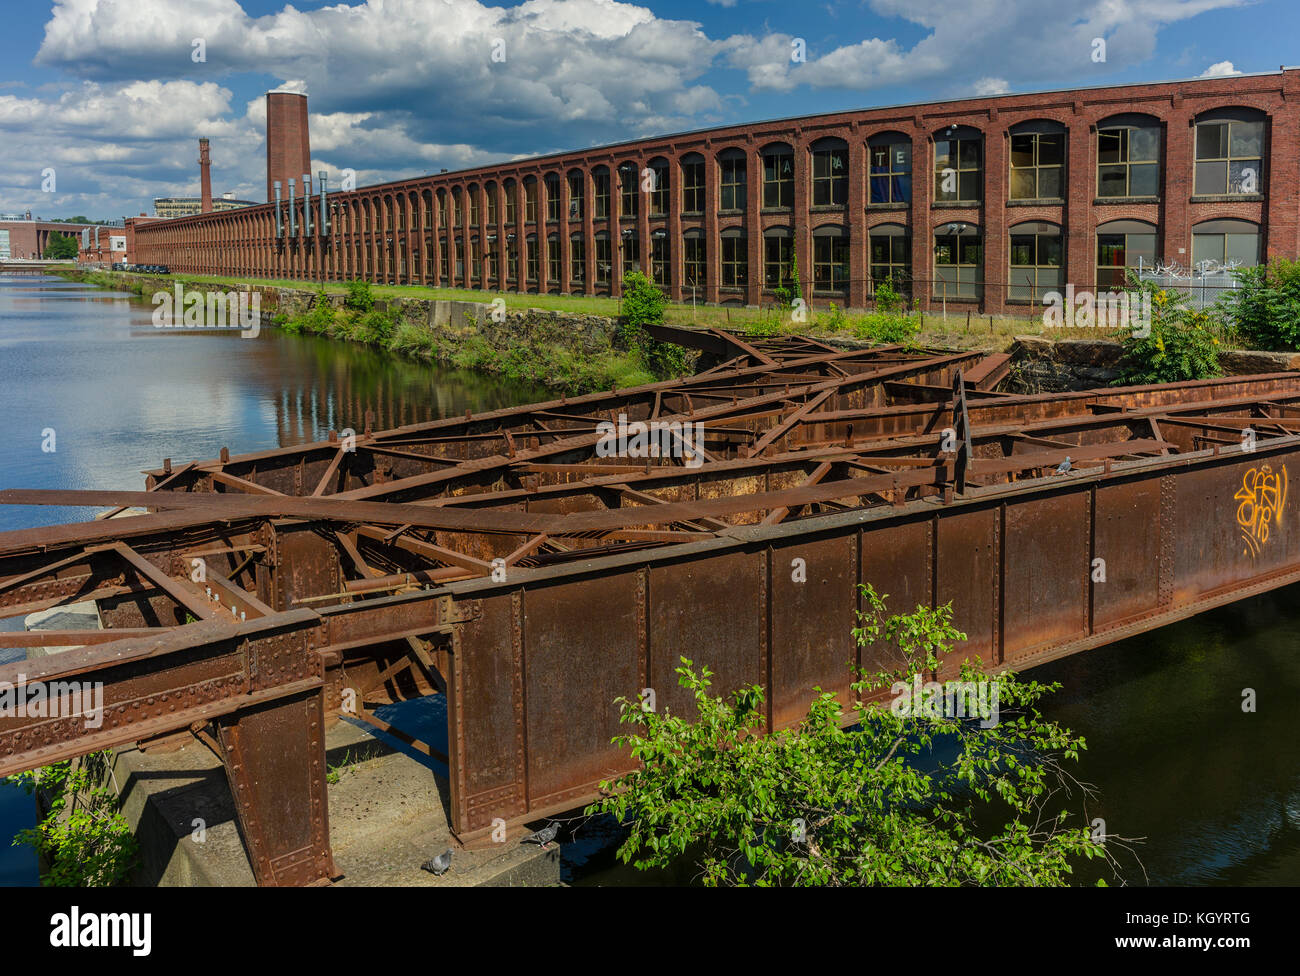 View of a mill building along a canal in Lawrence Massachusetts. Stock Photo